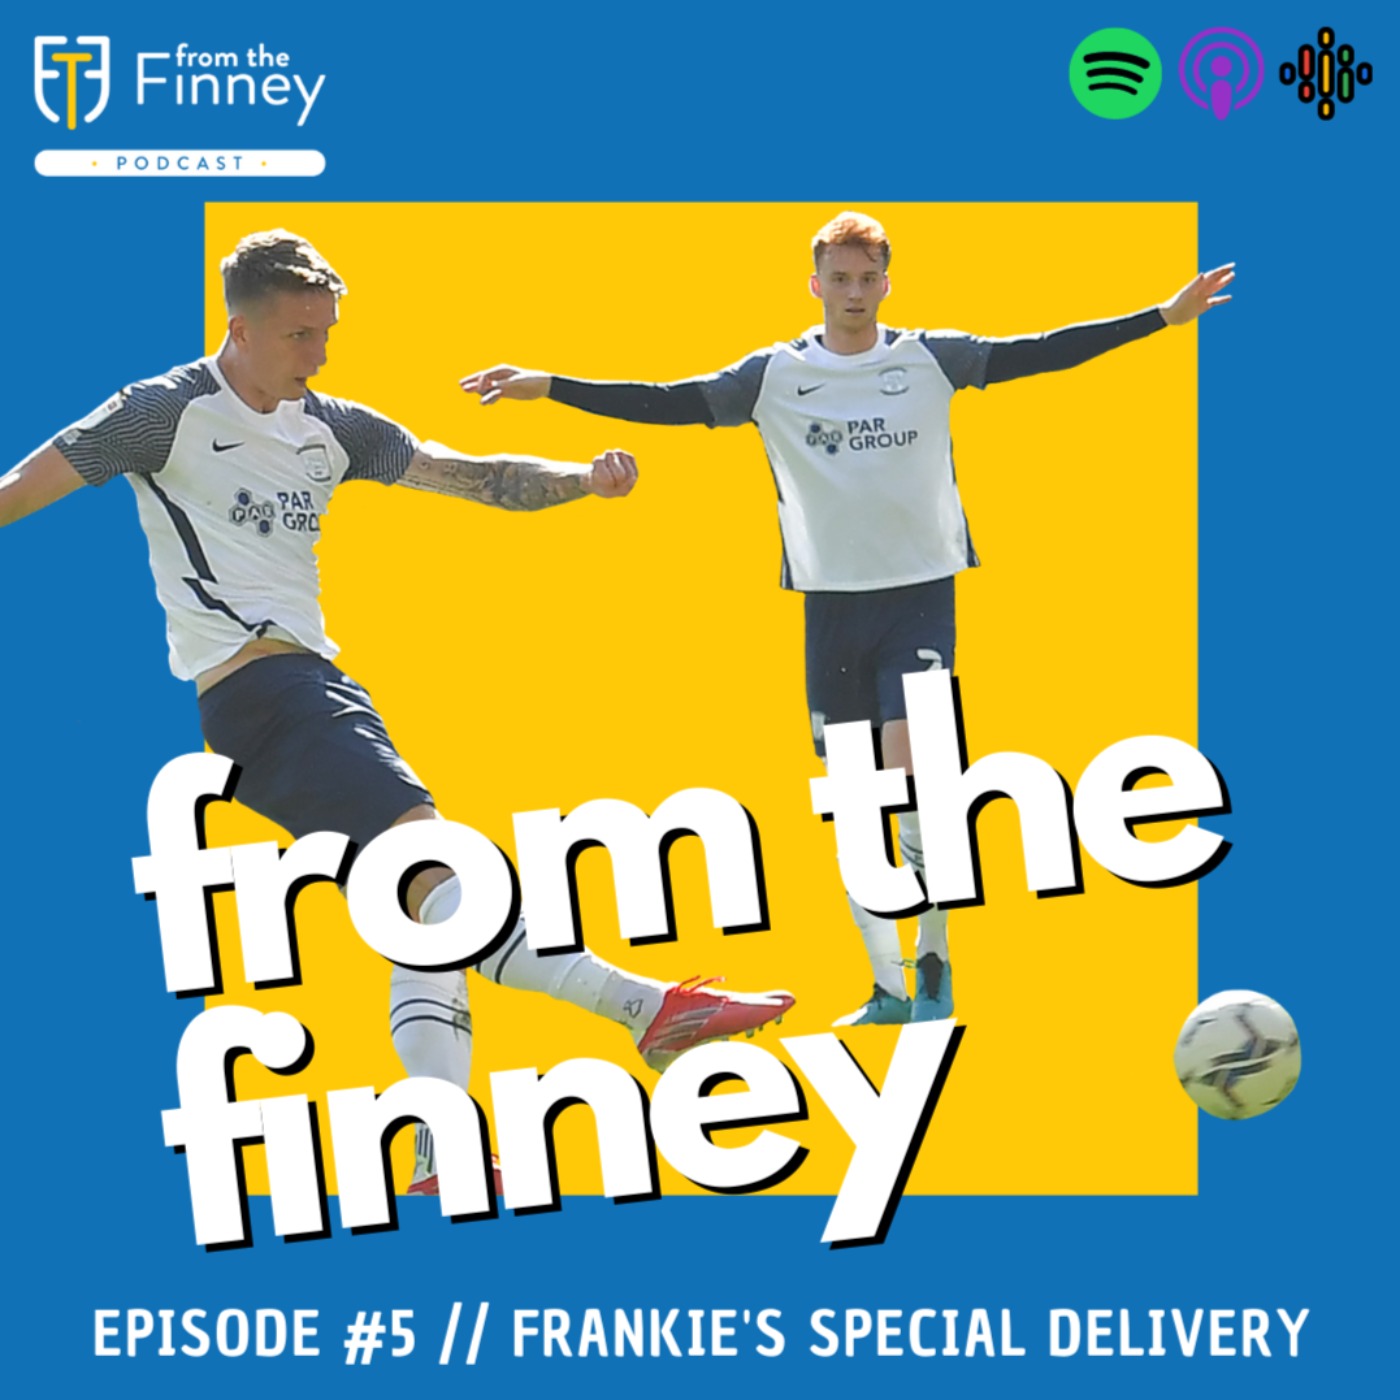 Episode #5 // Frankie's Special Delivery // From the Finney Podcast